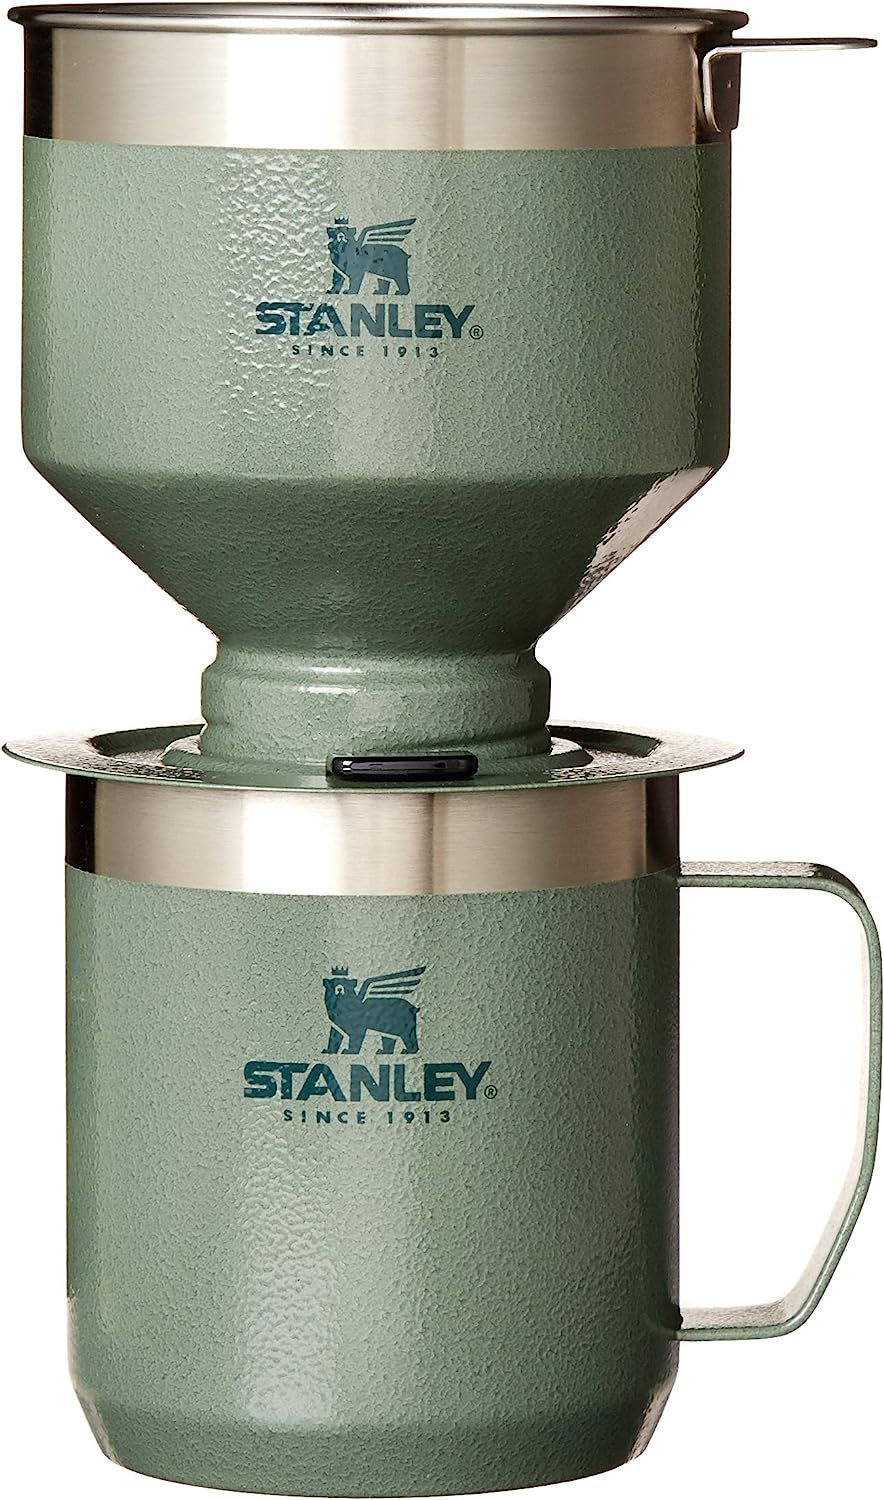 A sage green stainless steel set of two mug-sized cups stacked to create a pourover coffee maker